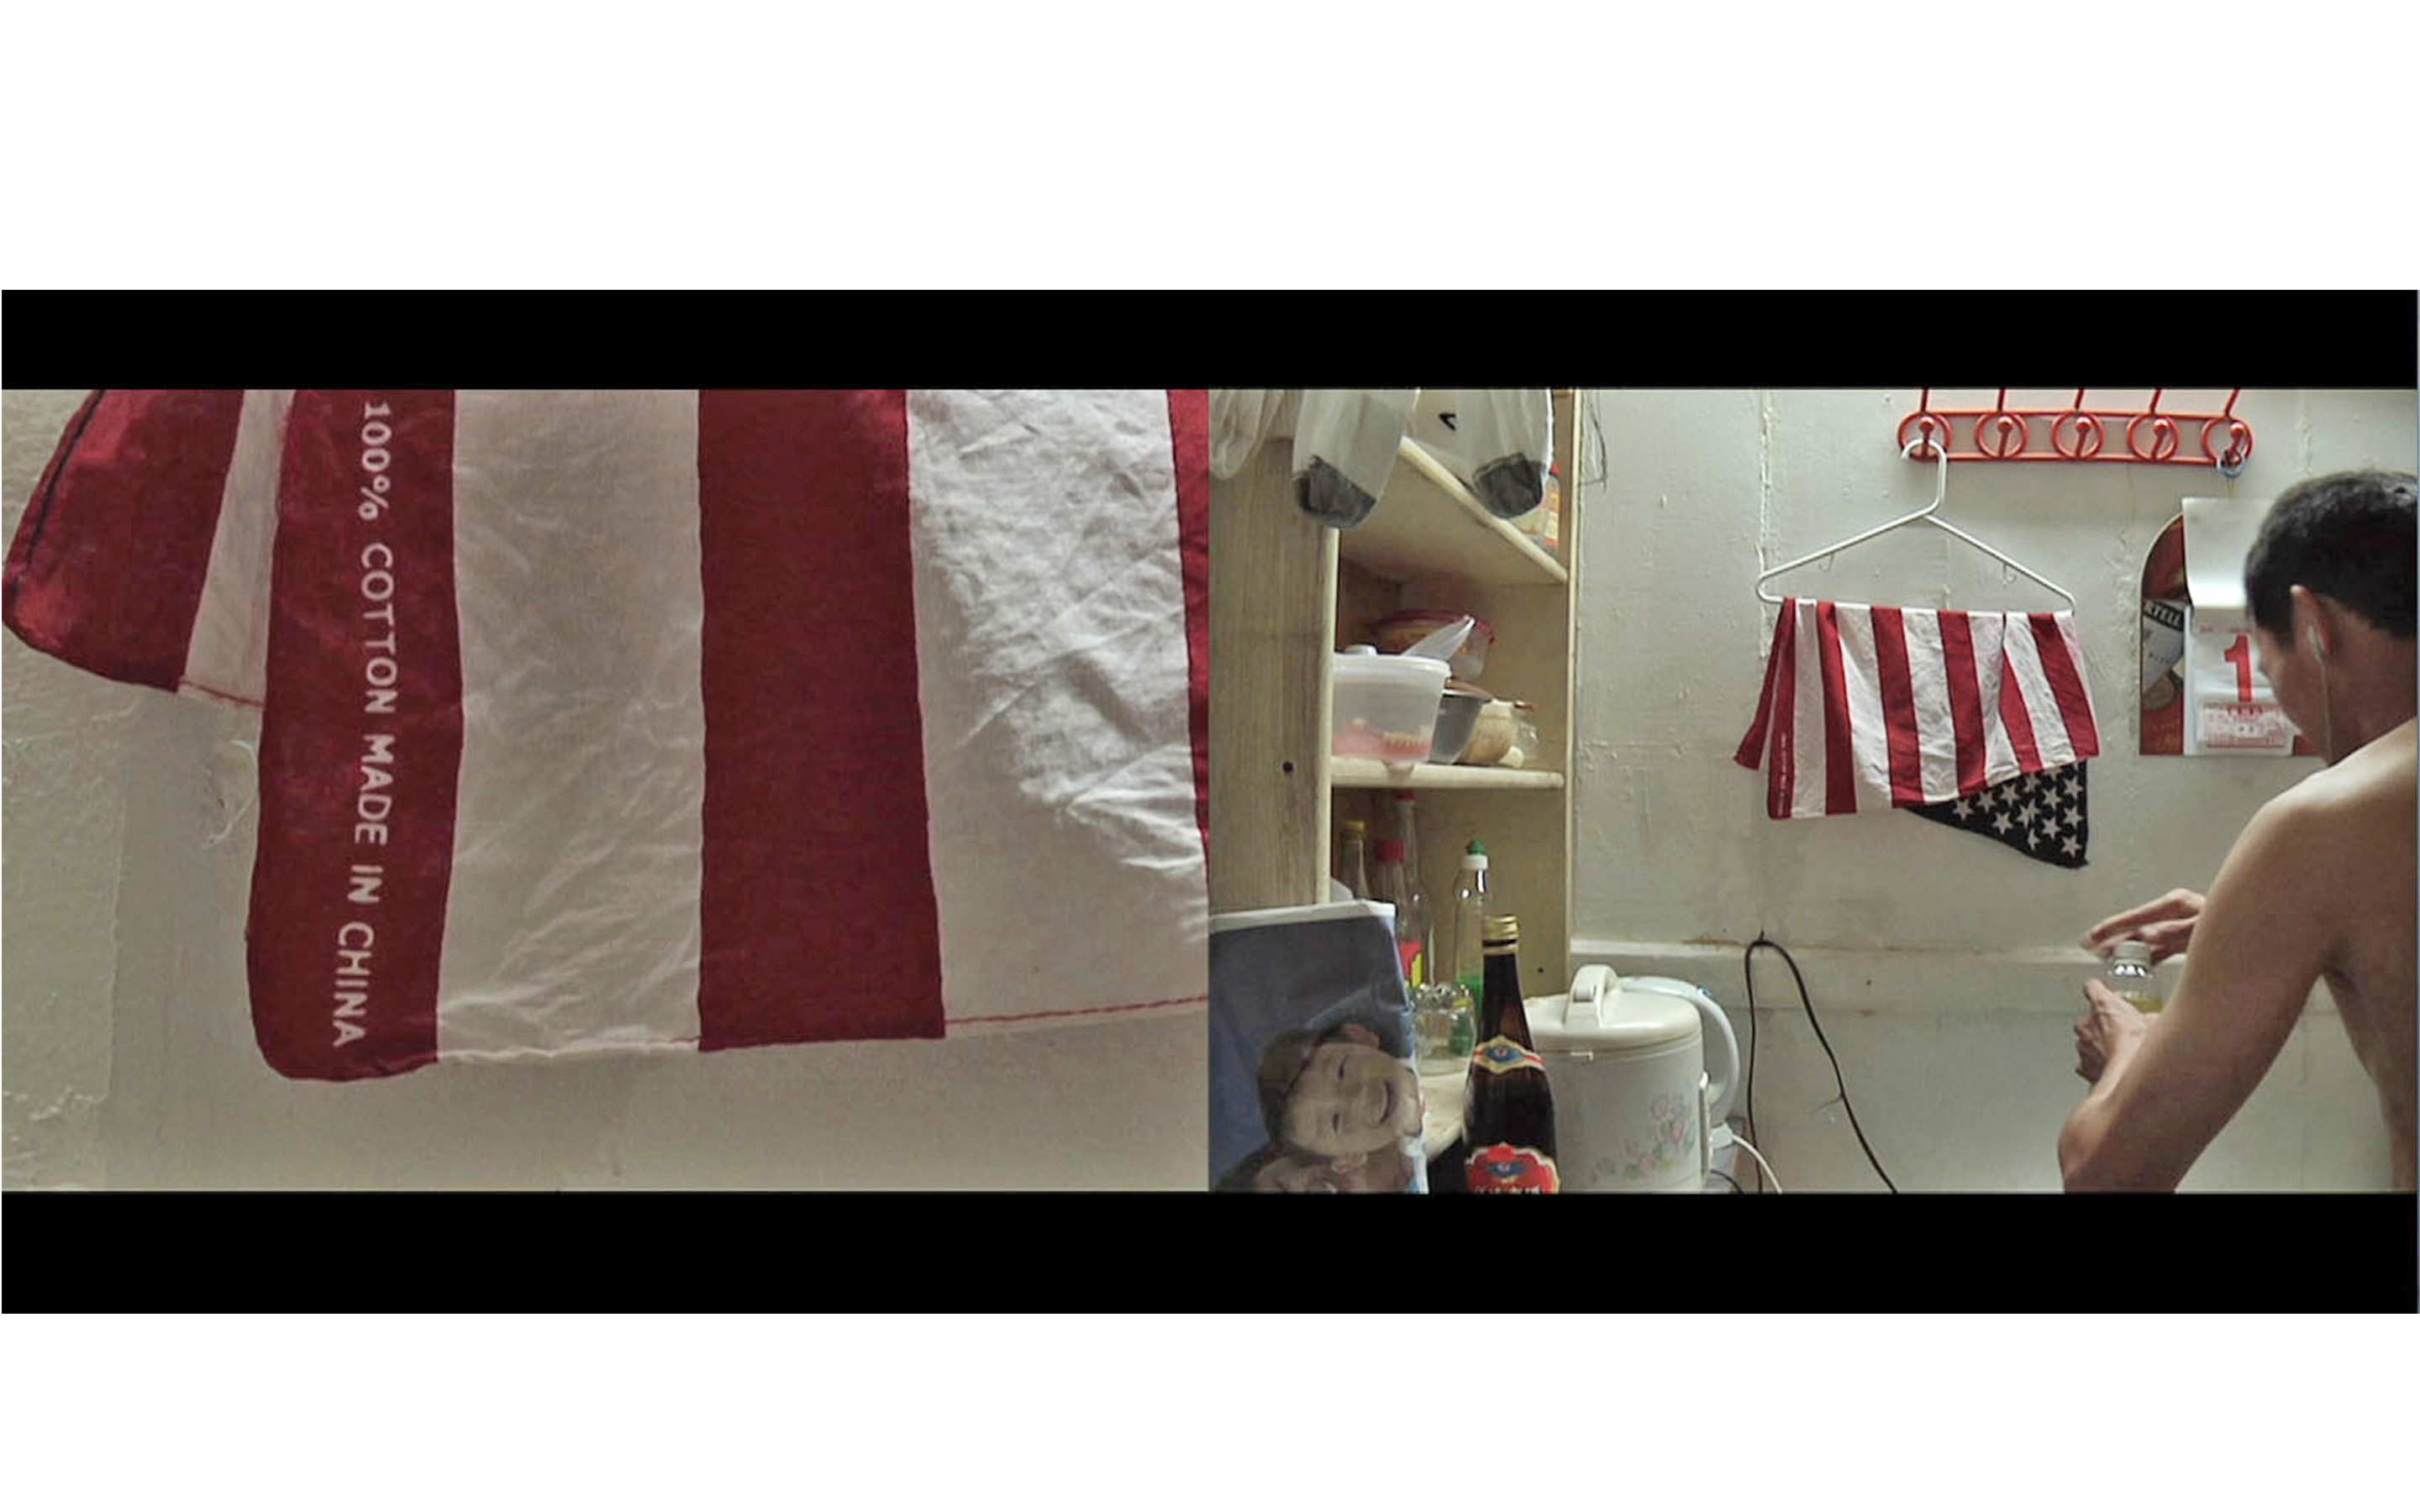 A split screen shows a man cooking shirtless in the kitchen, and a closeup of a hanging American flag that says "100% cotton made in China"